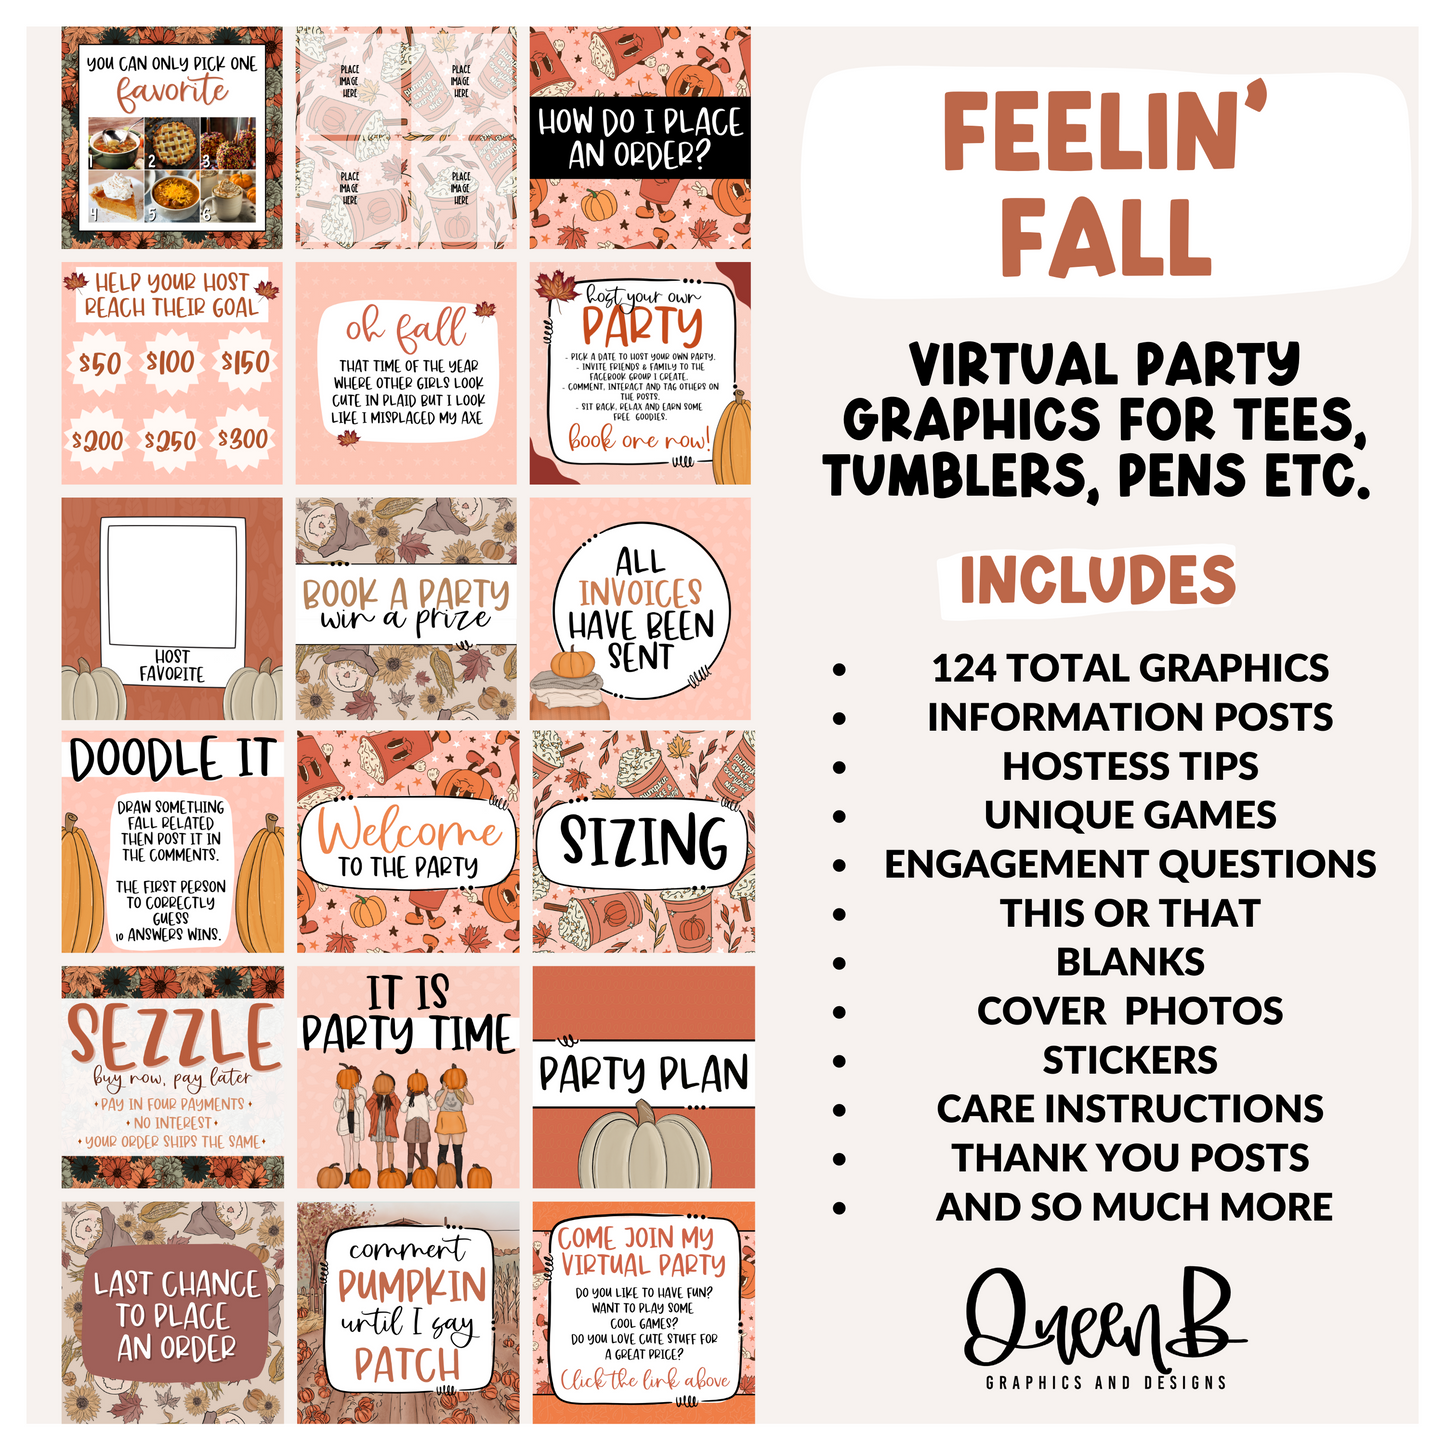 Feelin’ Fall Tee Party & Basic Party Graphics Collection